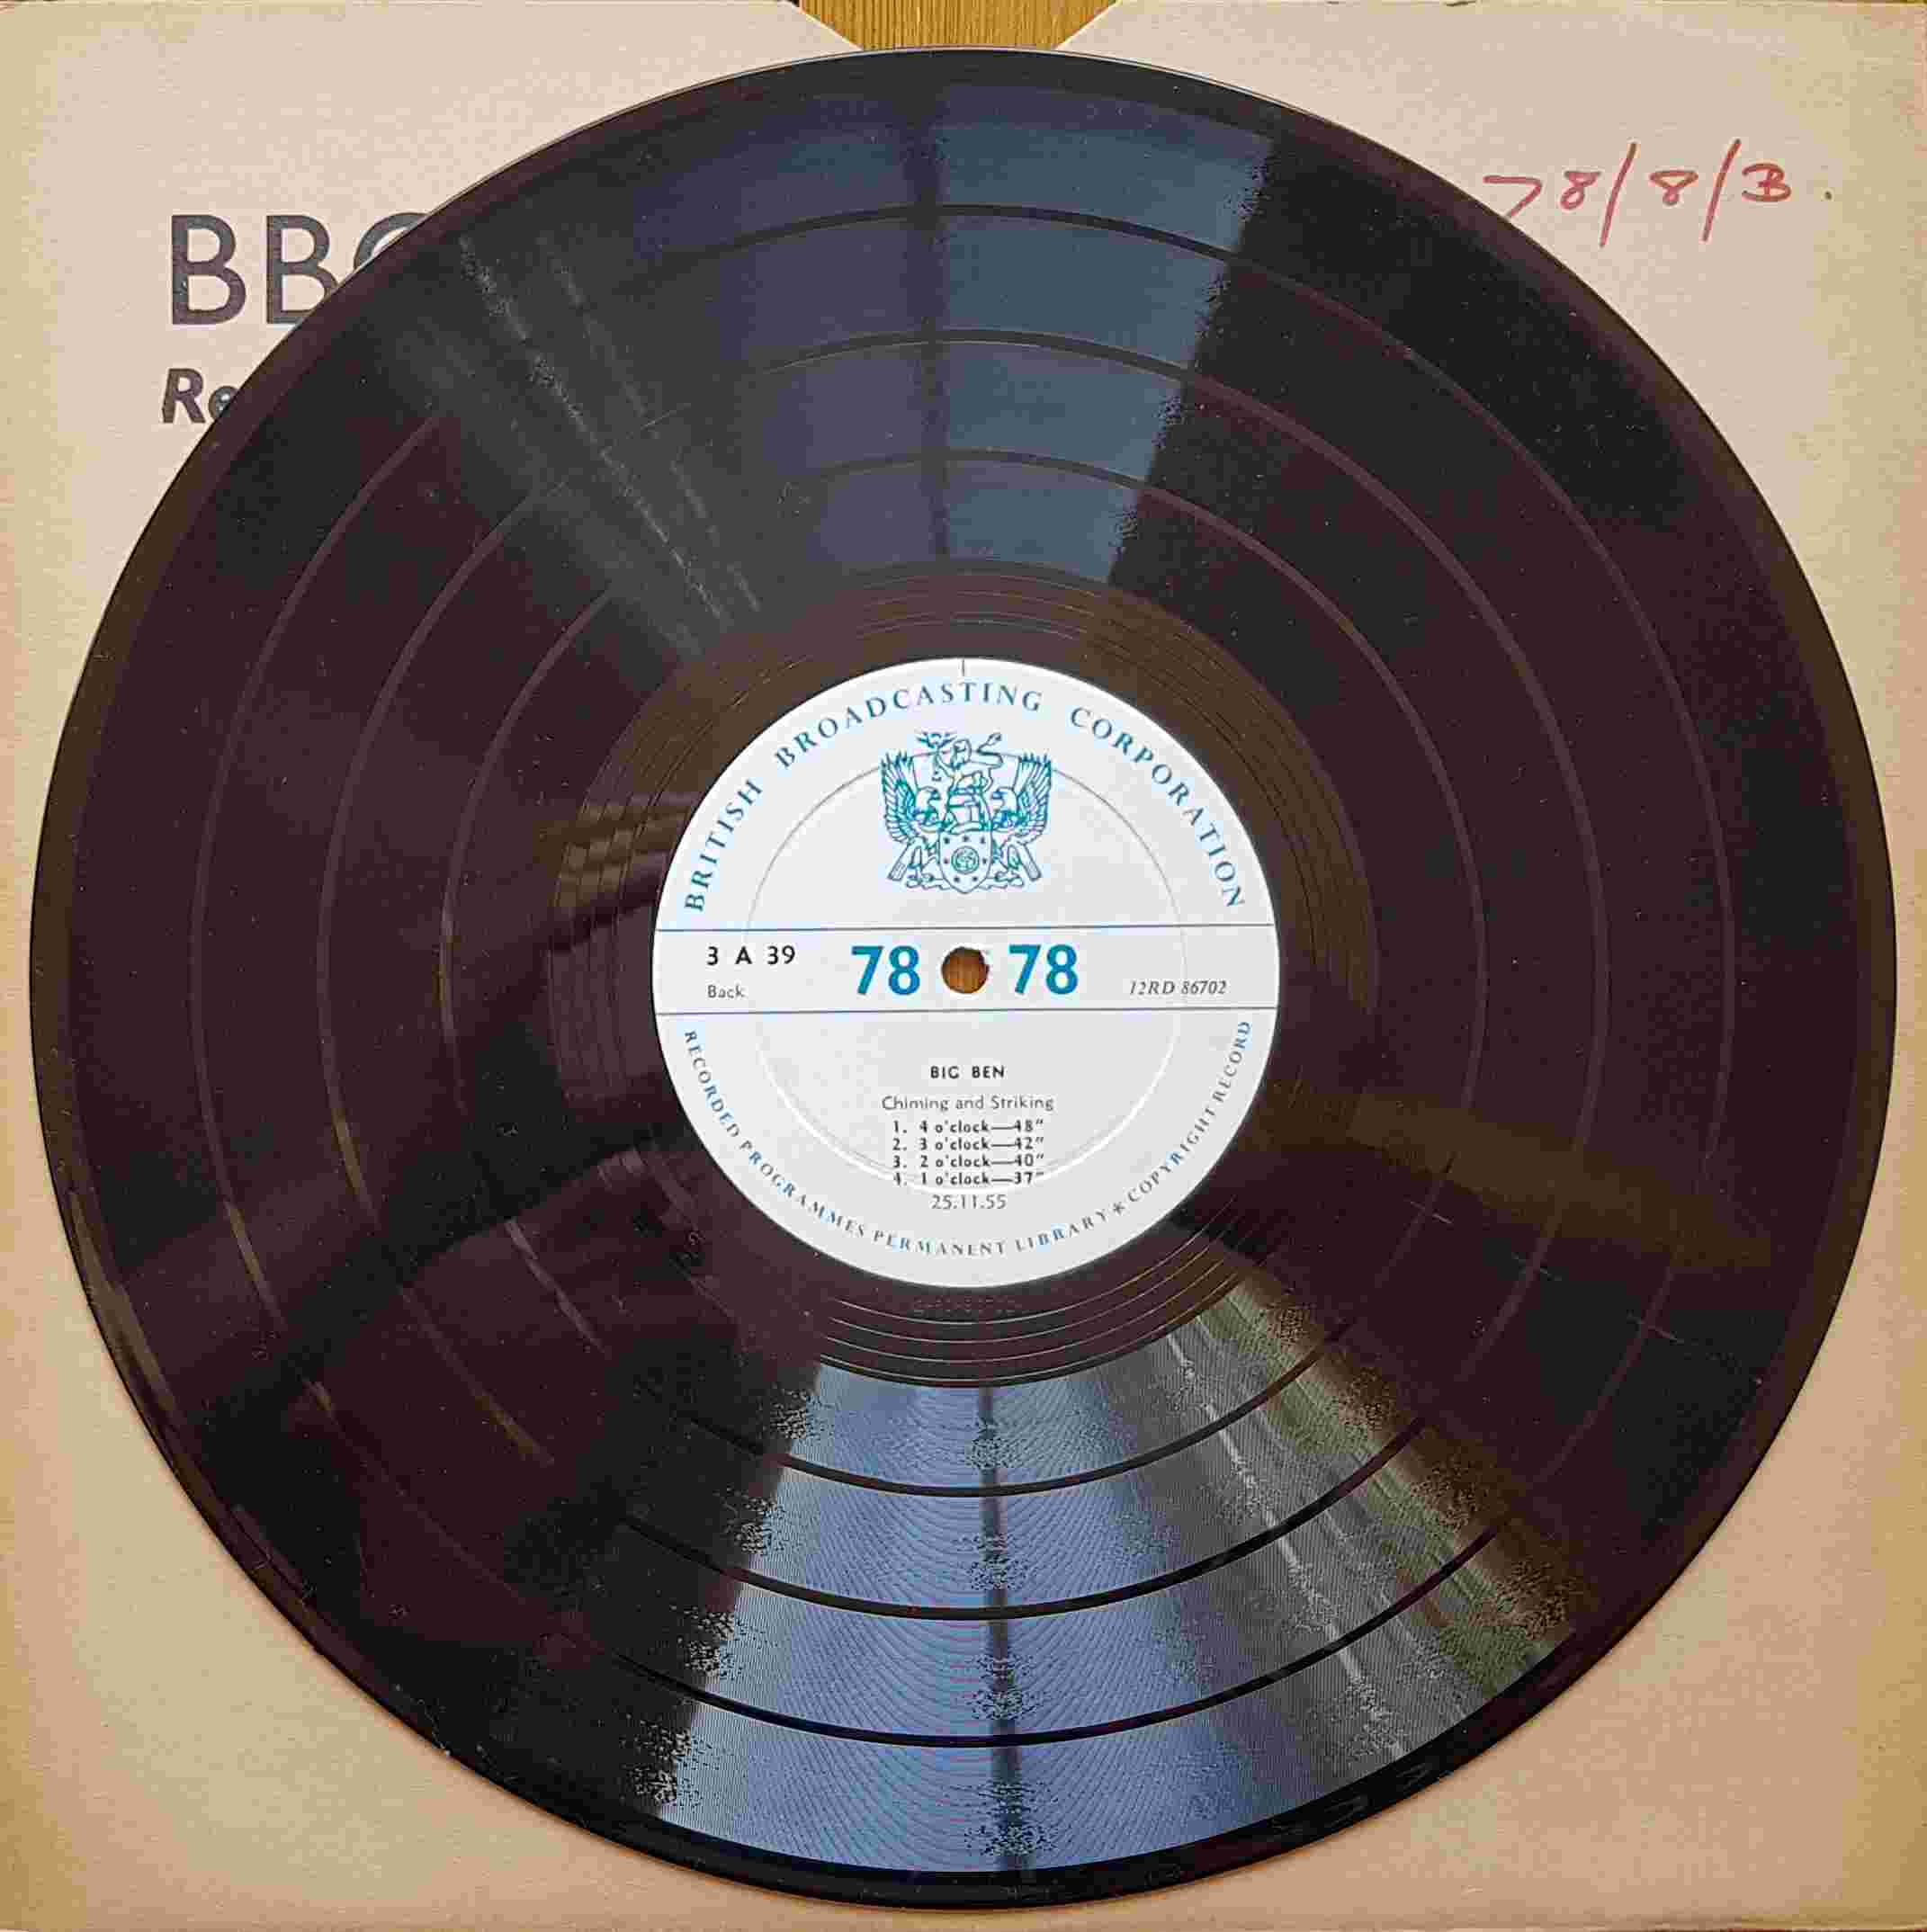 Picture of 3 A 39 Big Ben by artist Not registered from the BBC records and Tapes library